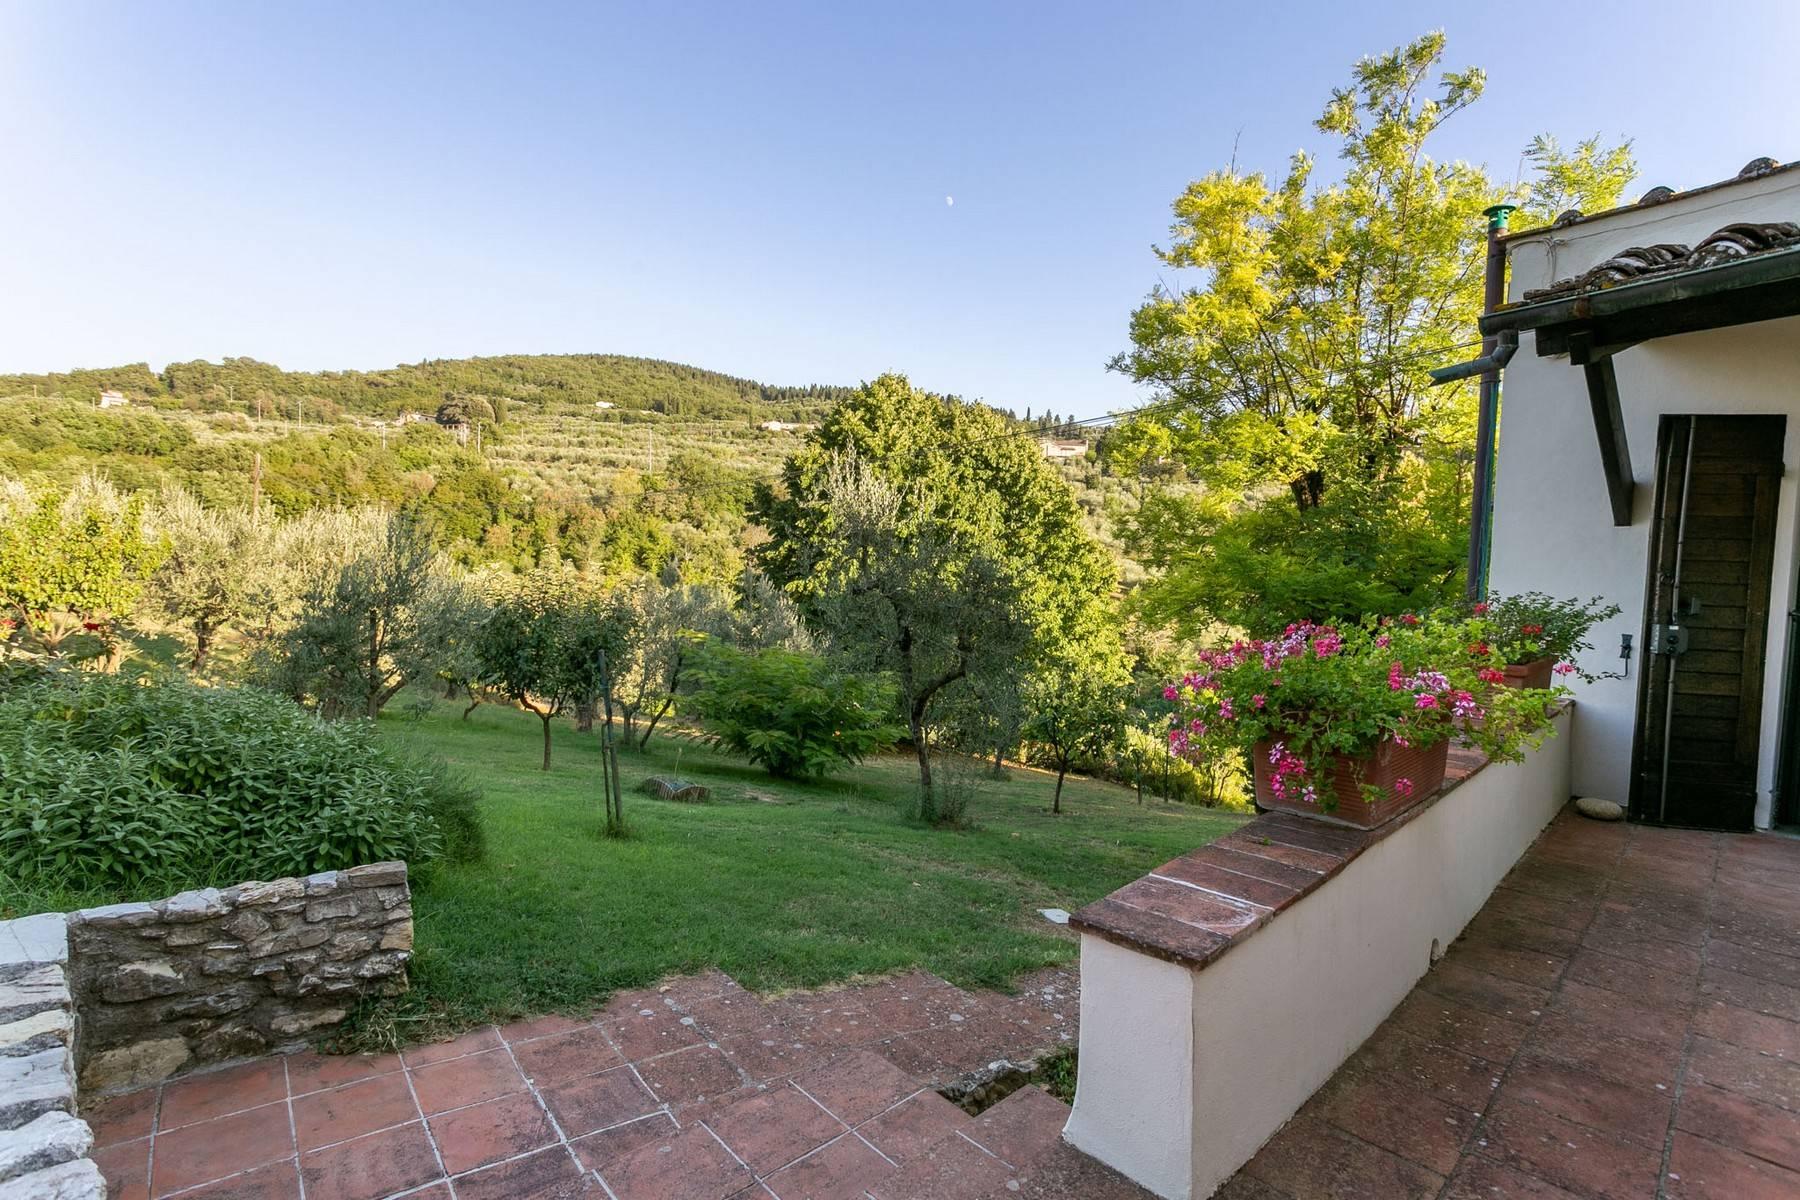 Villa immersed in a 7,000 sqm garden close to Florence - 19